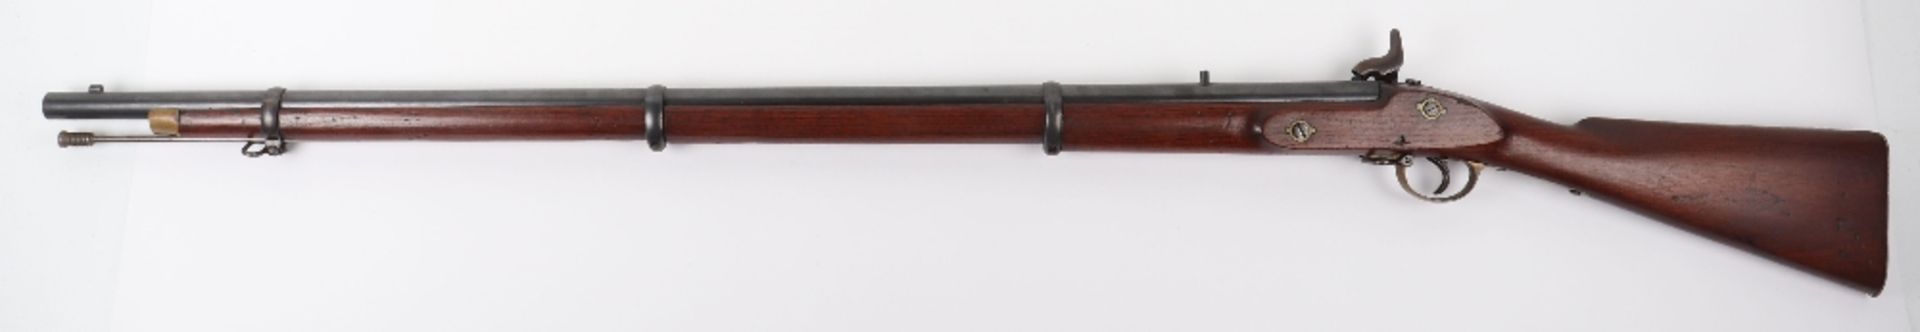 14 Bore Indian Military Style Percussion Musket - Image 9 of 9